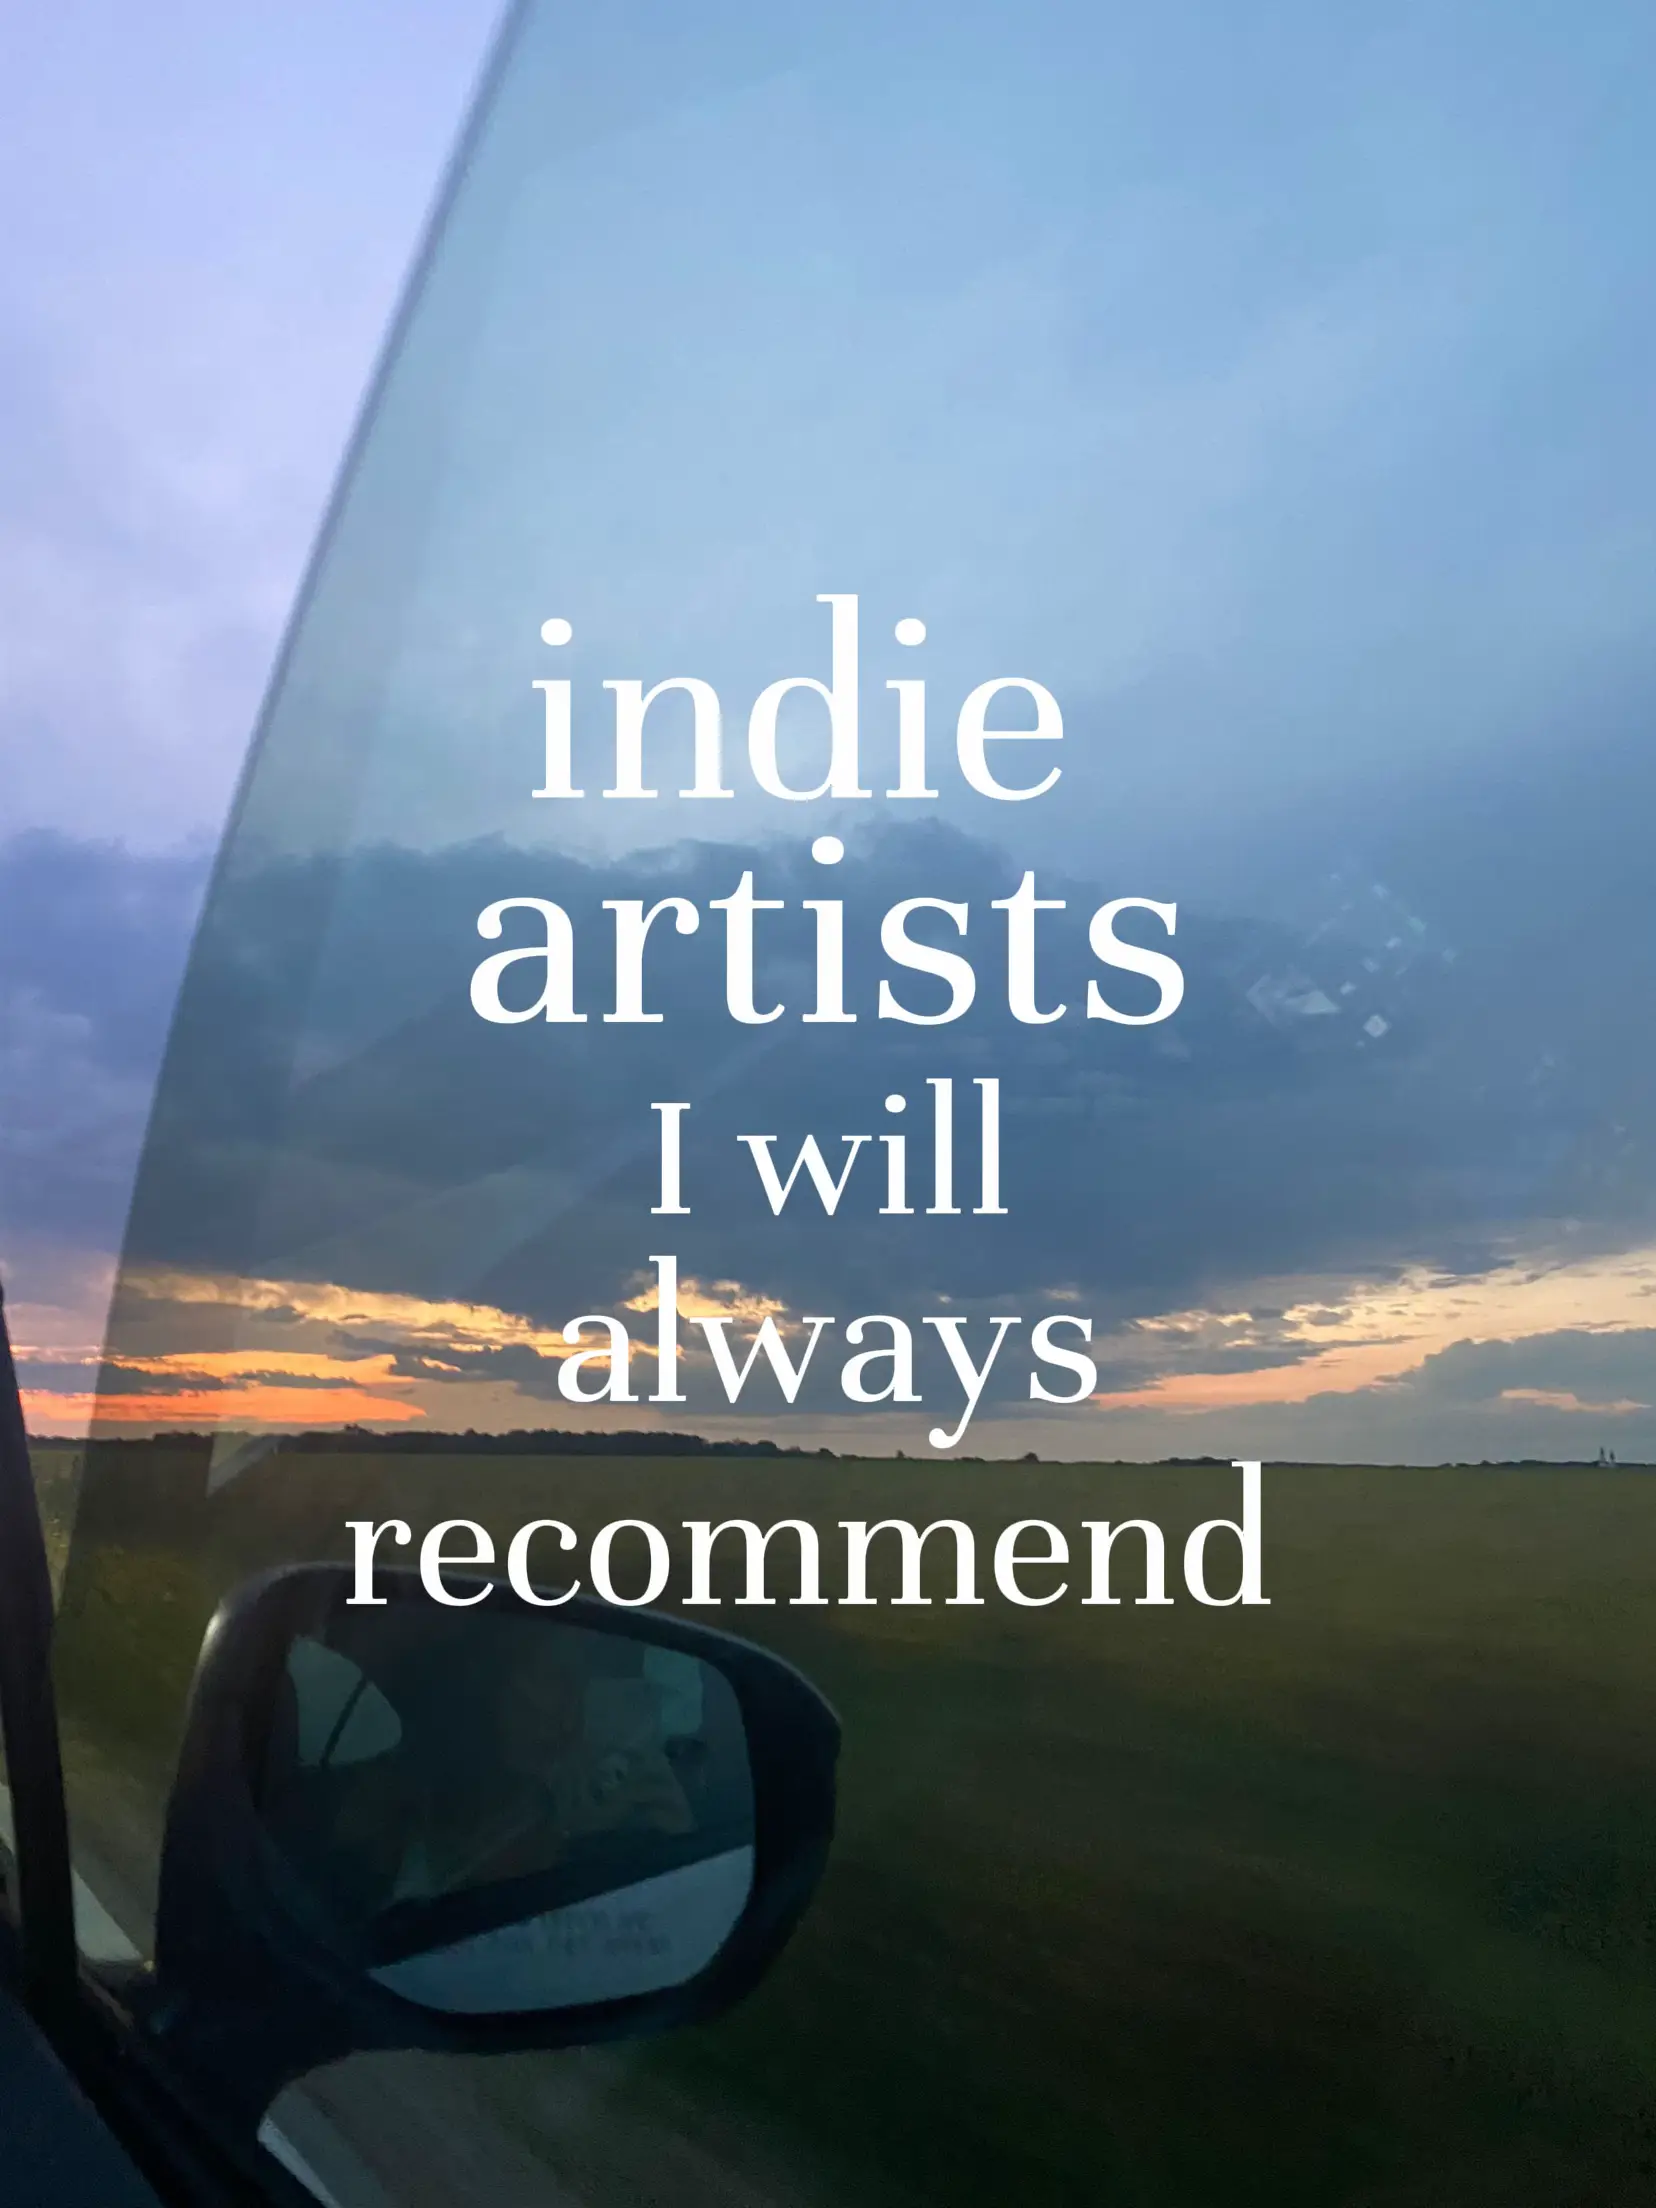 indie artists I love 🫶's images